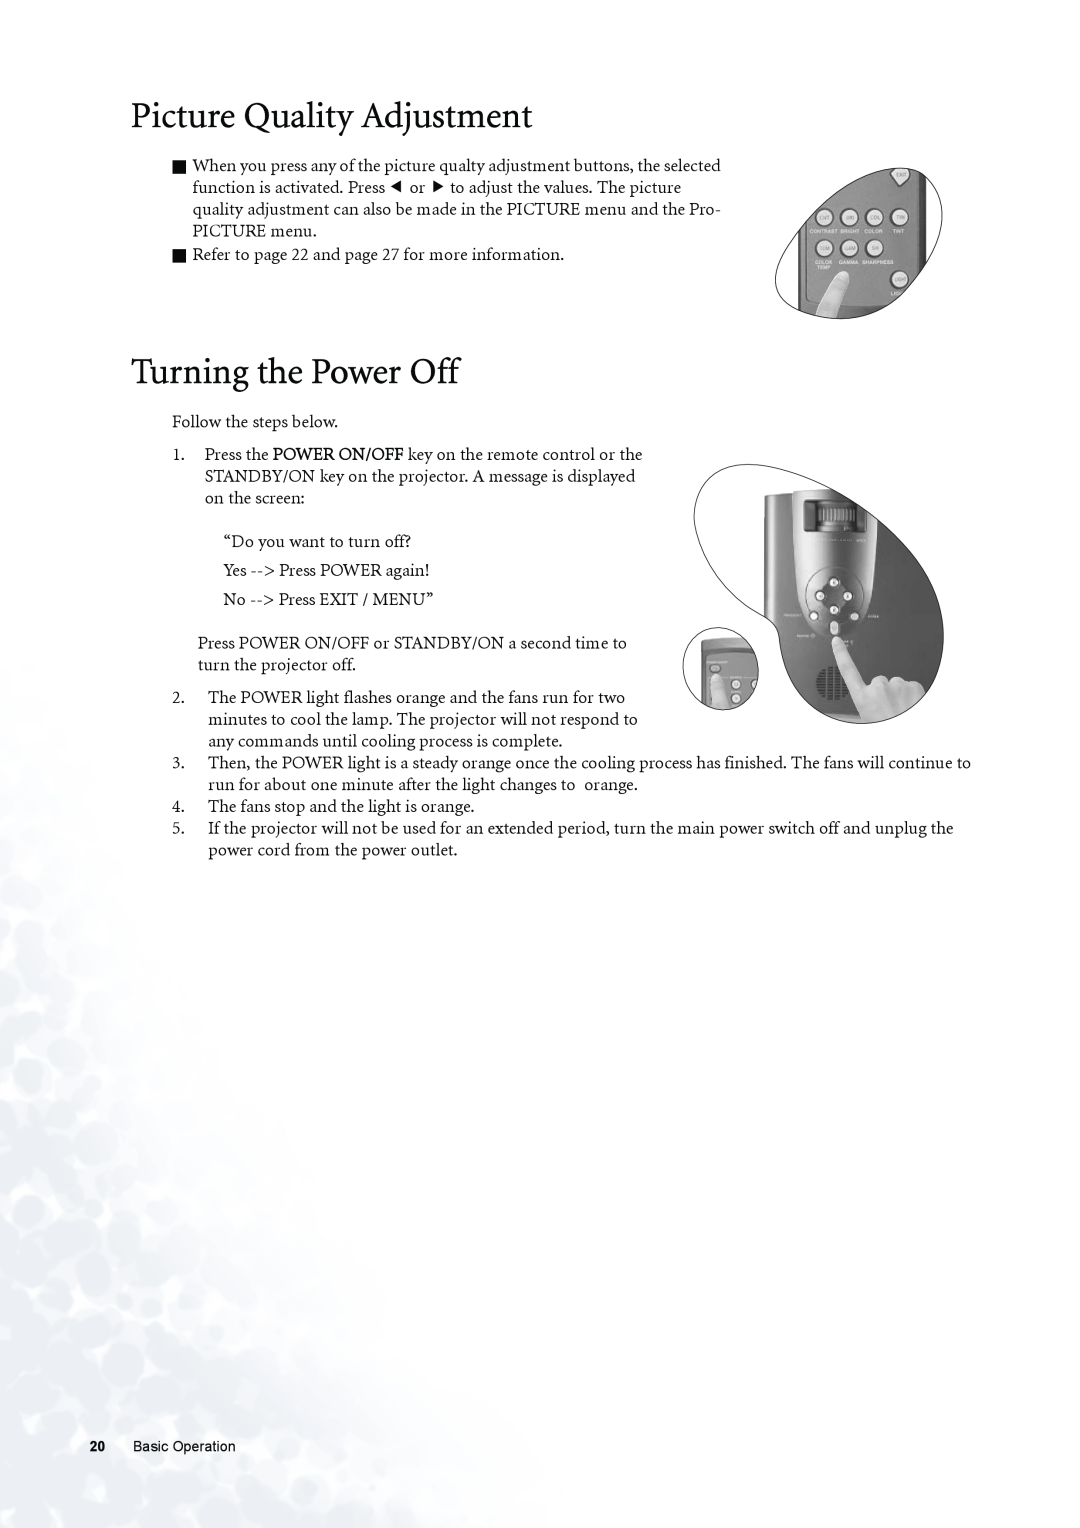 BenQ PE6800 user manual Picture Quality Adjustment, Turning the Power Off 